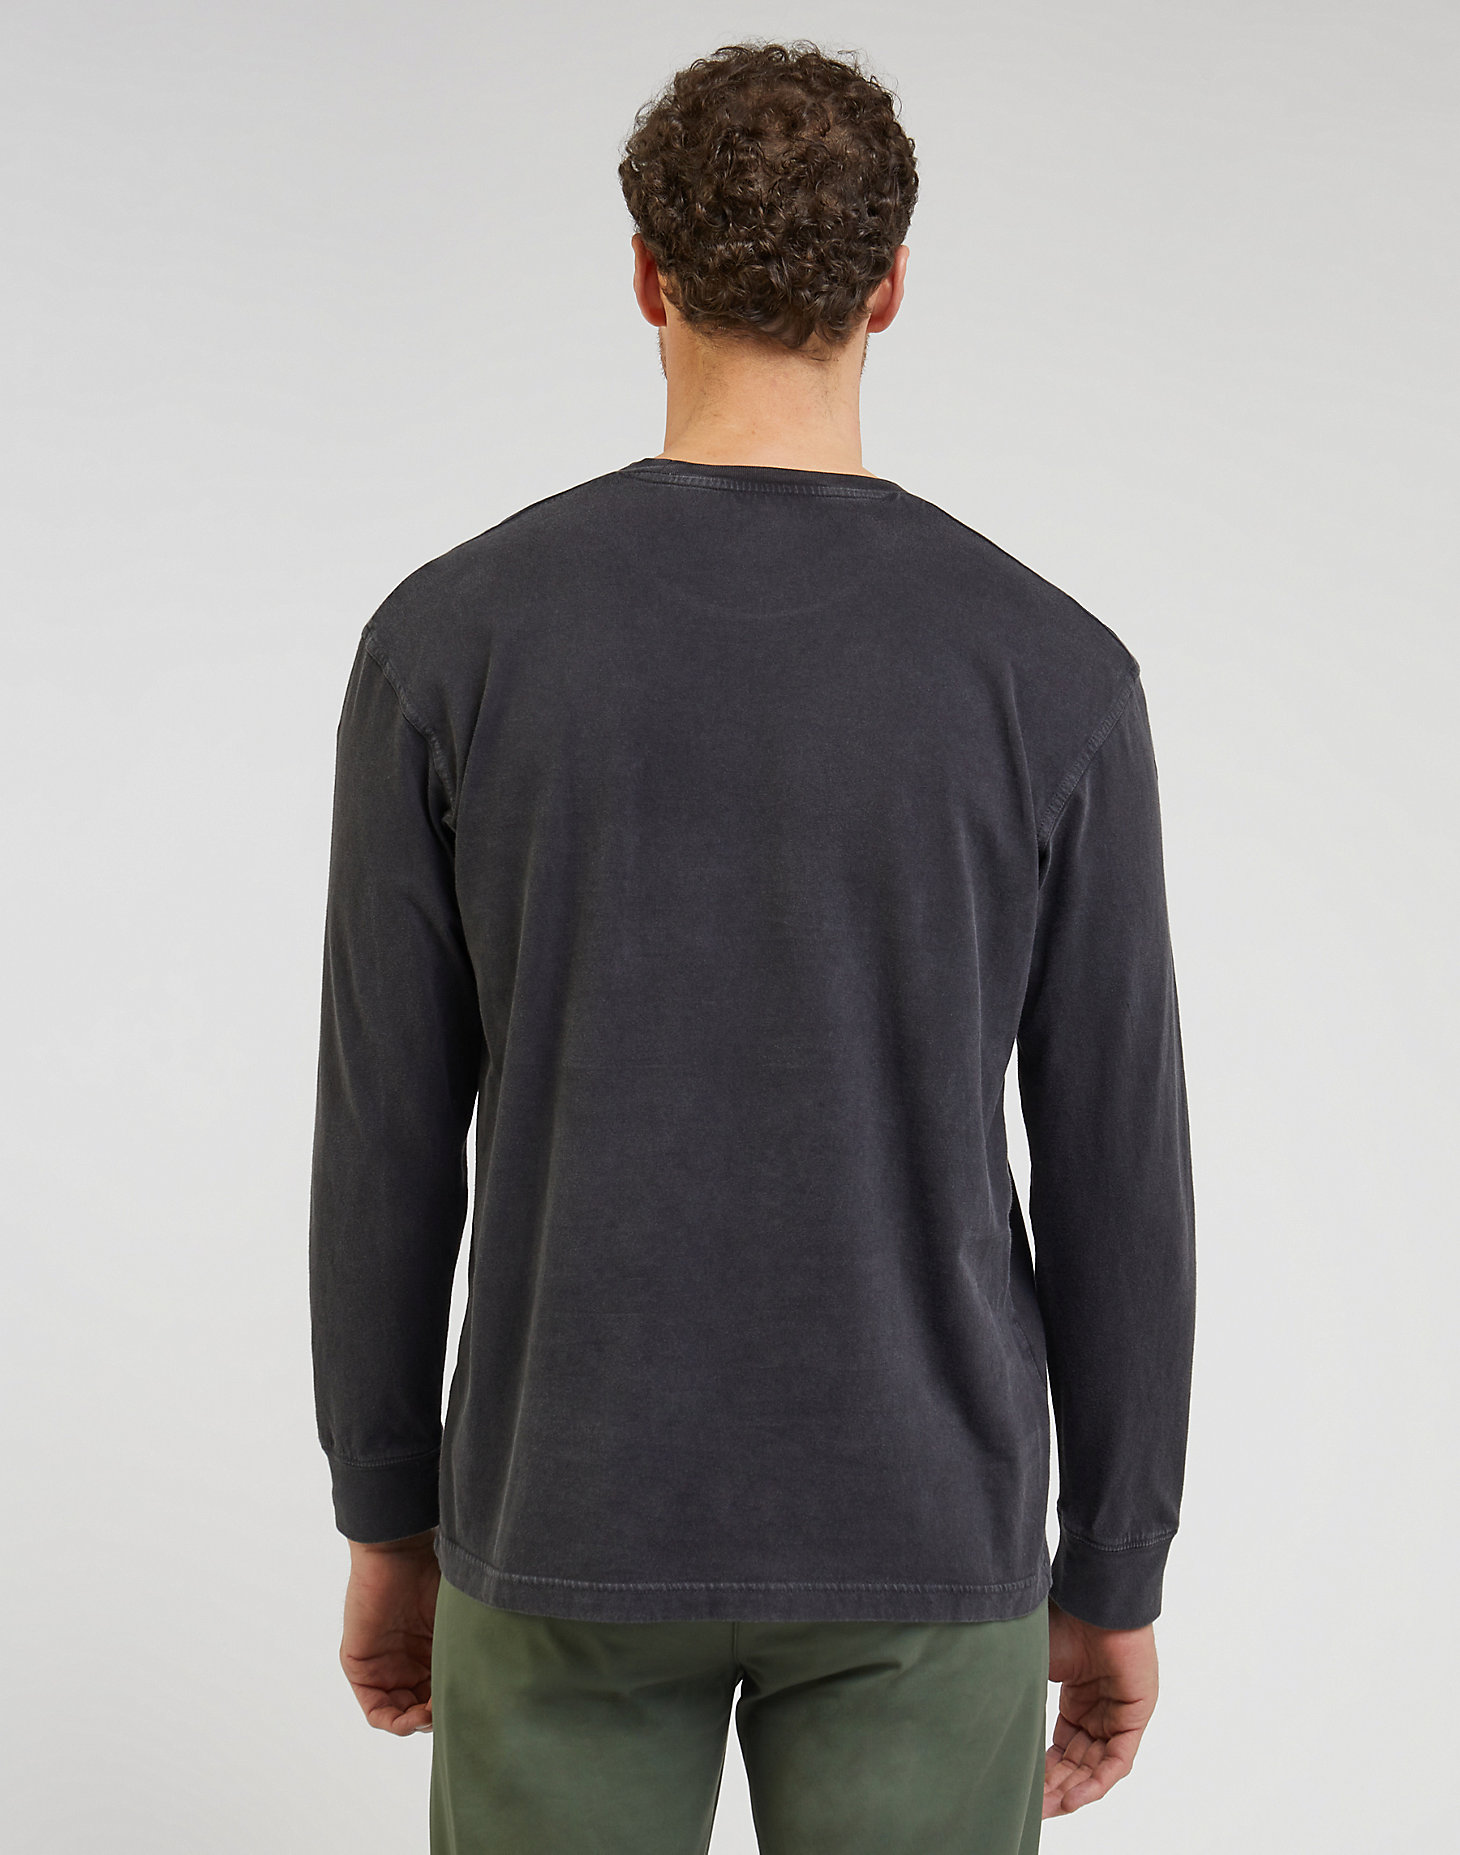 Long Sleeve Pocket Tee in Washed Black alternative view 1